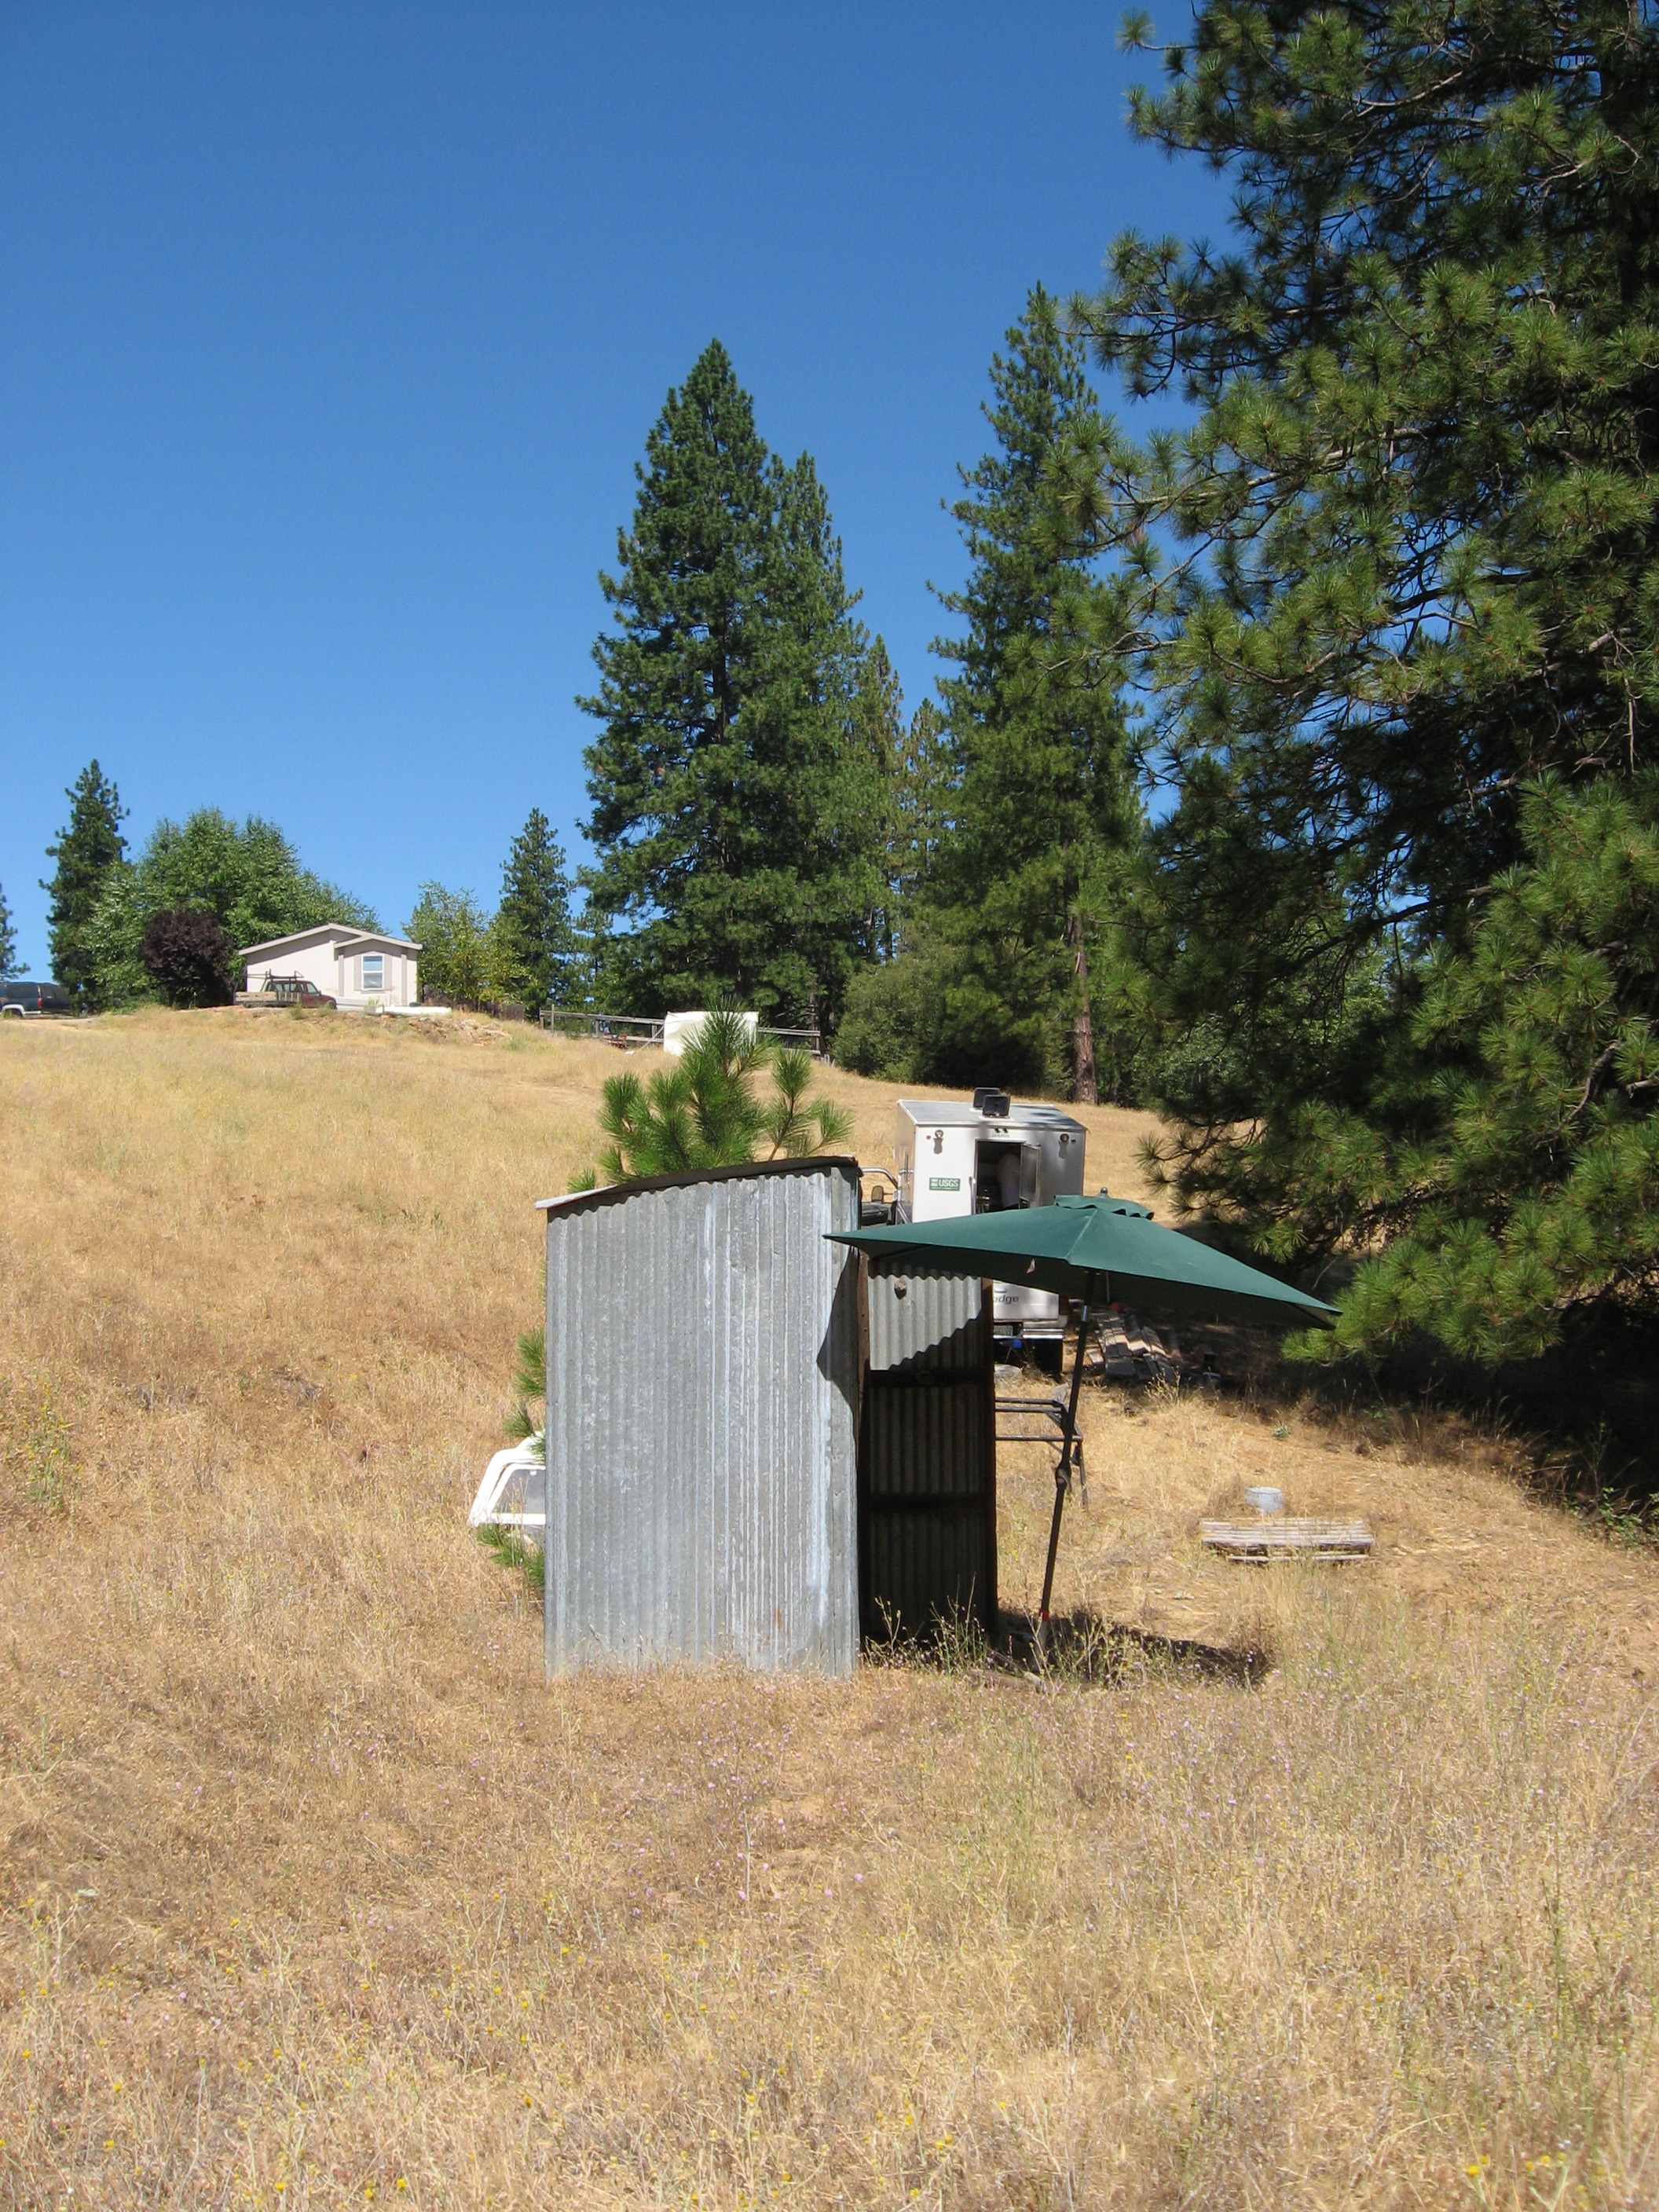 Typical domestic well location in California foothills